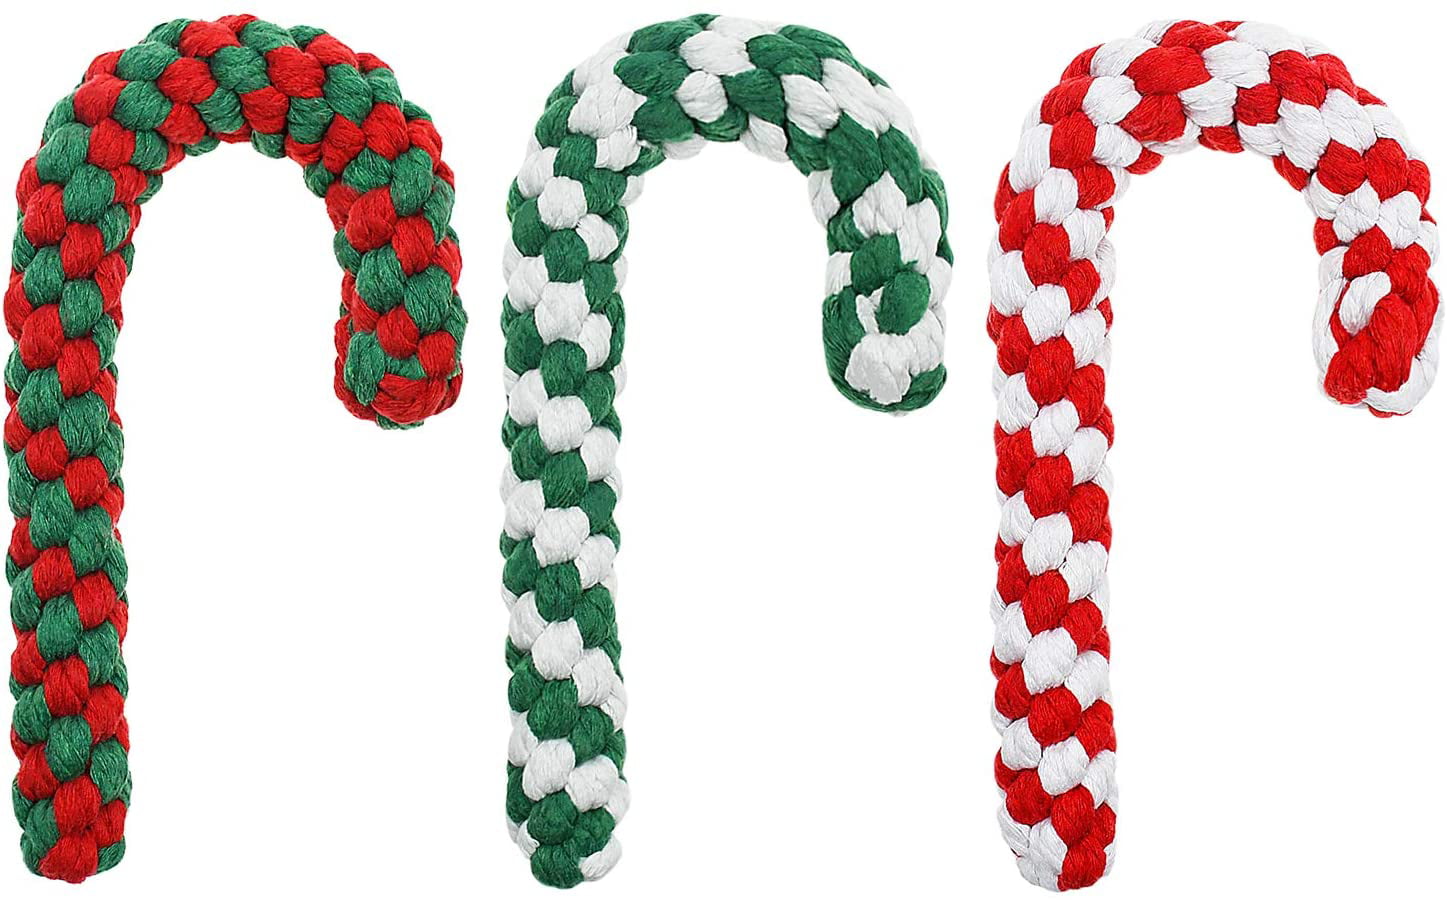 Christmas Classic Elements Indestructible Interactive Dog Toys Malier 3 Pack Dog Rope Toy Durable Tough Chew Crutch Shape Rope Toys for Small Medium Puppy Dogs 